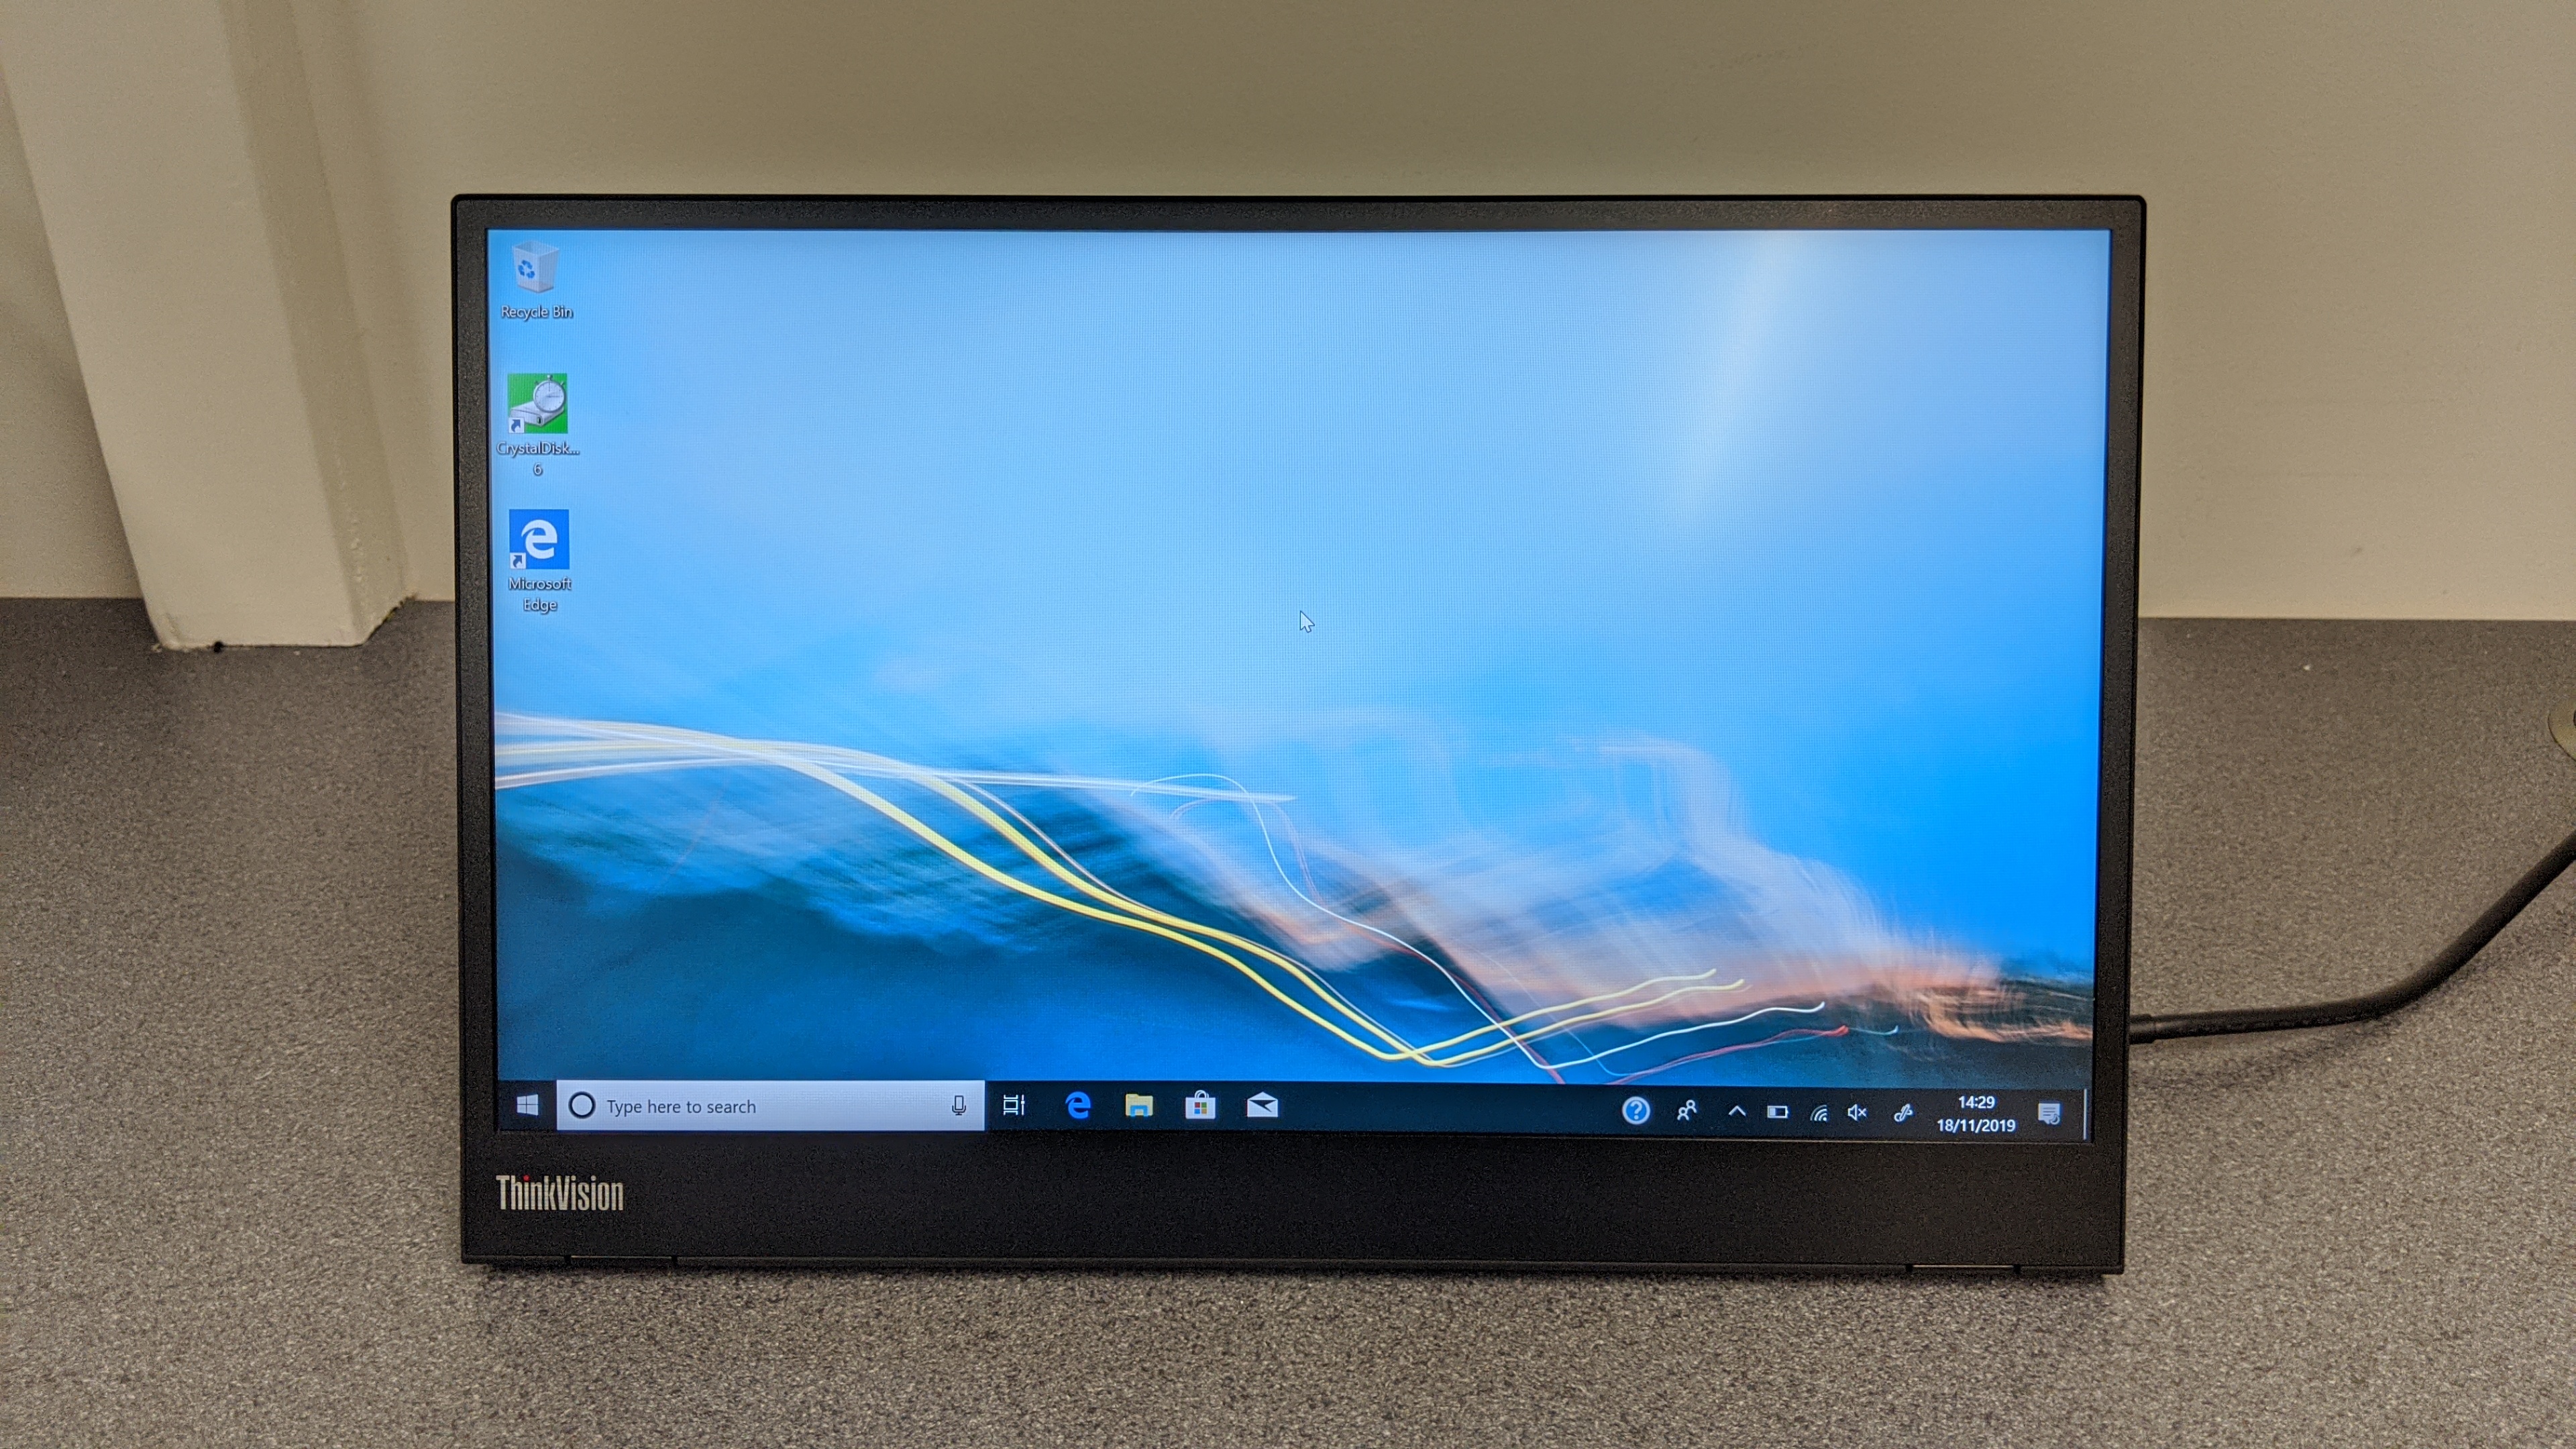 Lenovo ThinkVision M14 review: The leanest screen | ITPro